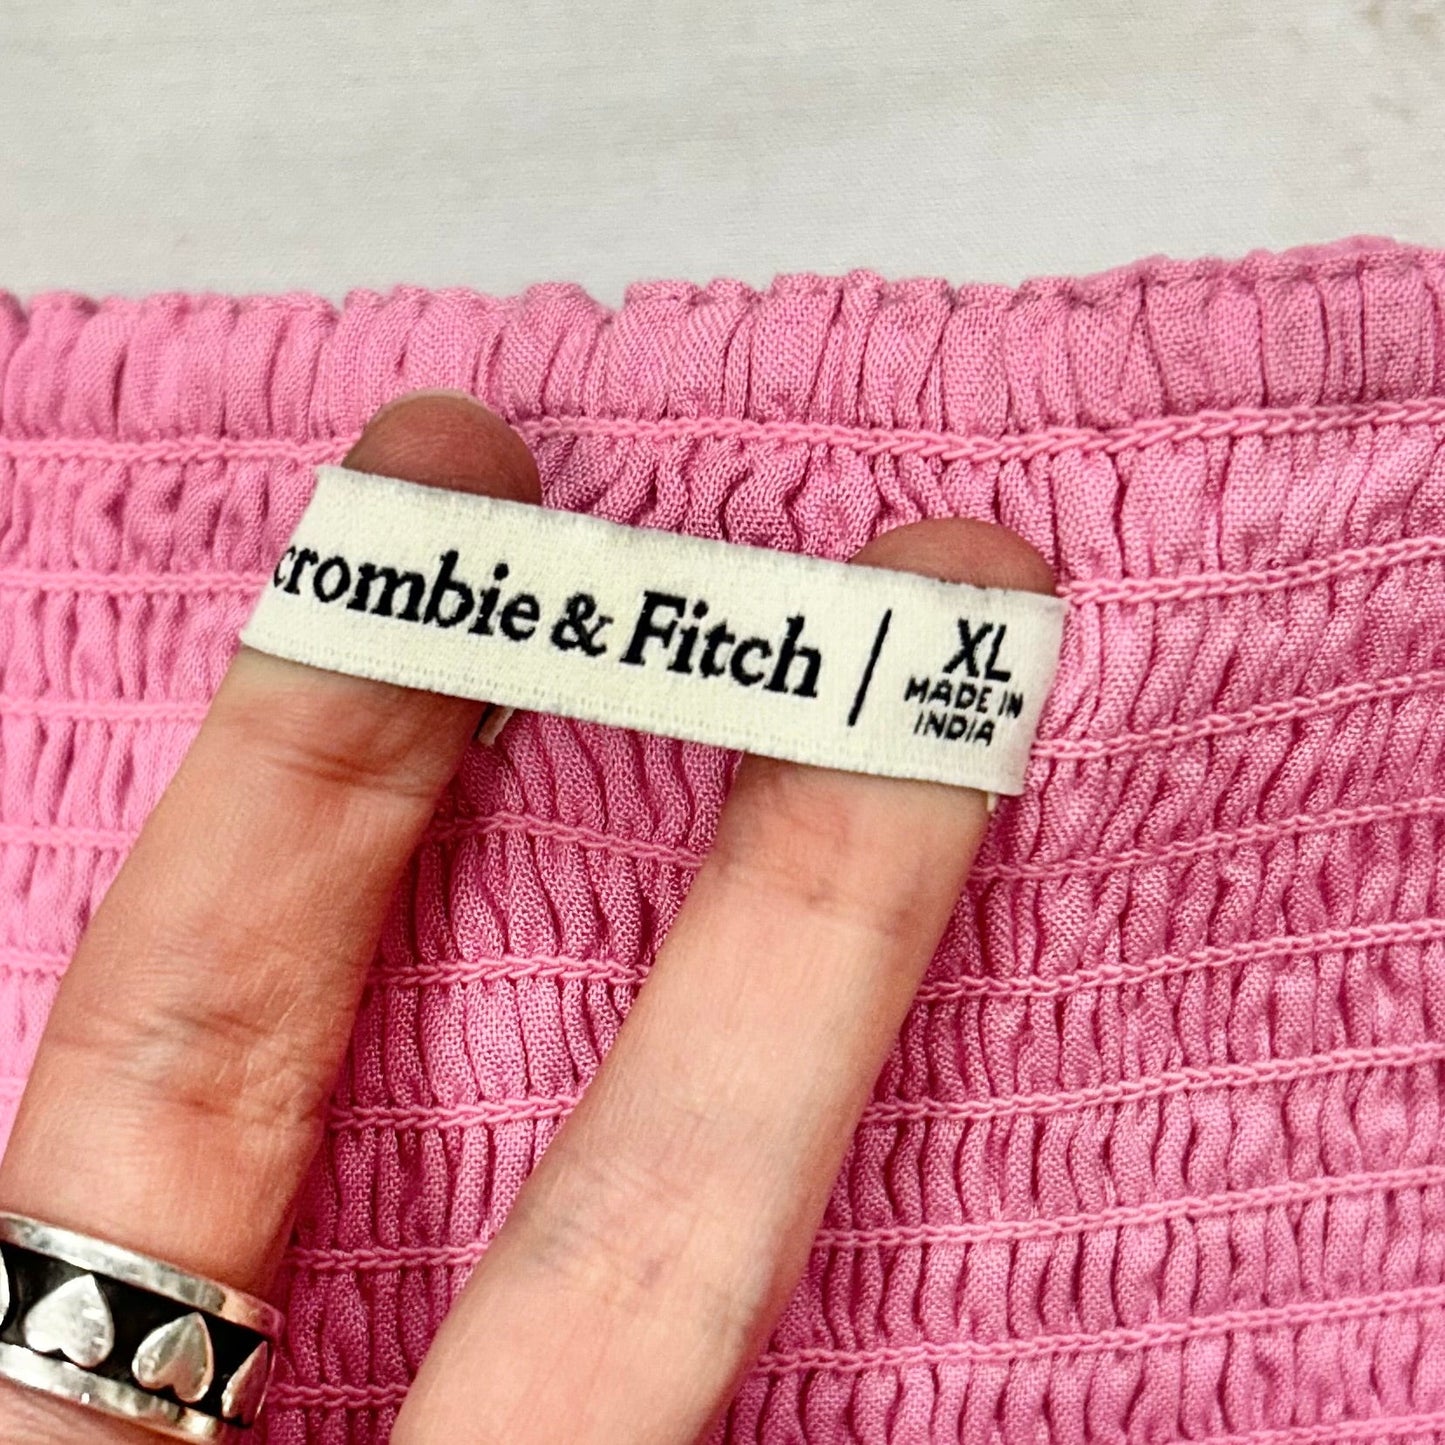 Pink Top Long Sleeve By Abercrombie And Fitch, Size: Xl